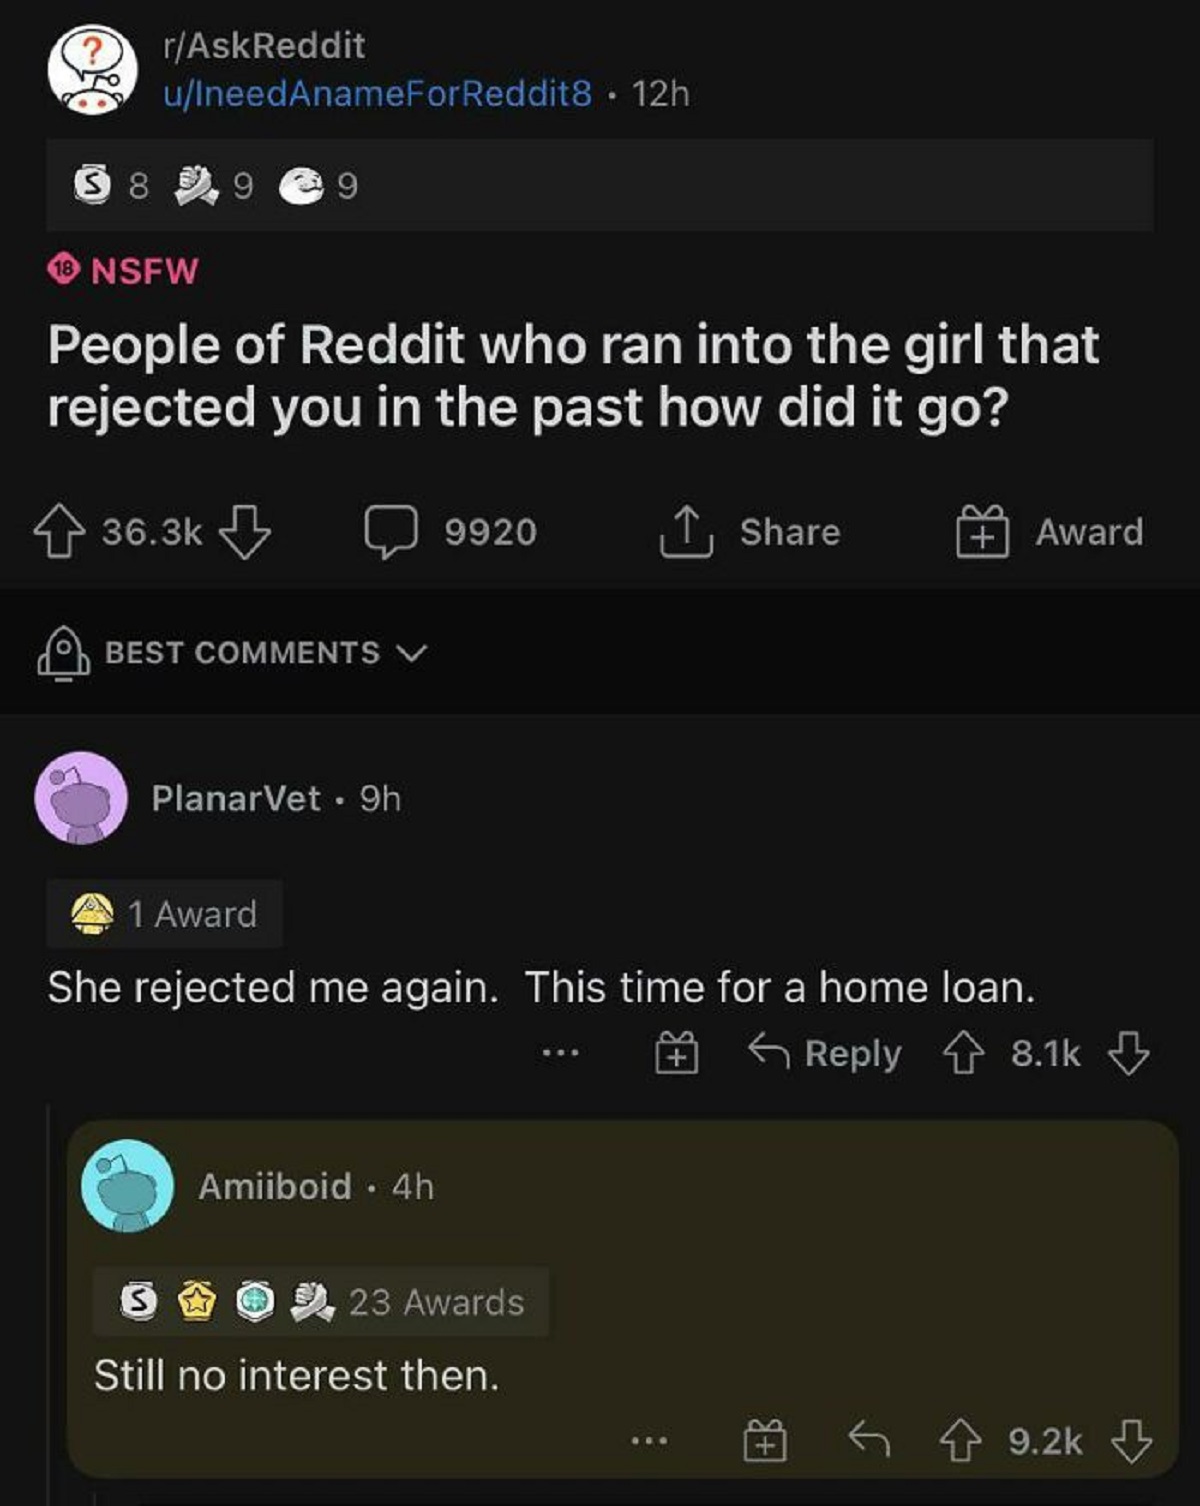 funny replies better than the original - best response when someone says your mom - S 8 rAskReddit uIneedAnameForReddit8 12h 18 Nsfw People of Reddit who ran into the girl that rejected you in the past how did it go? 9920 Award Best PlanarVet 9h 1 Award S